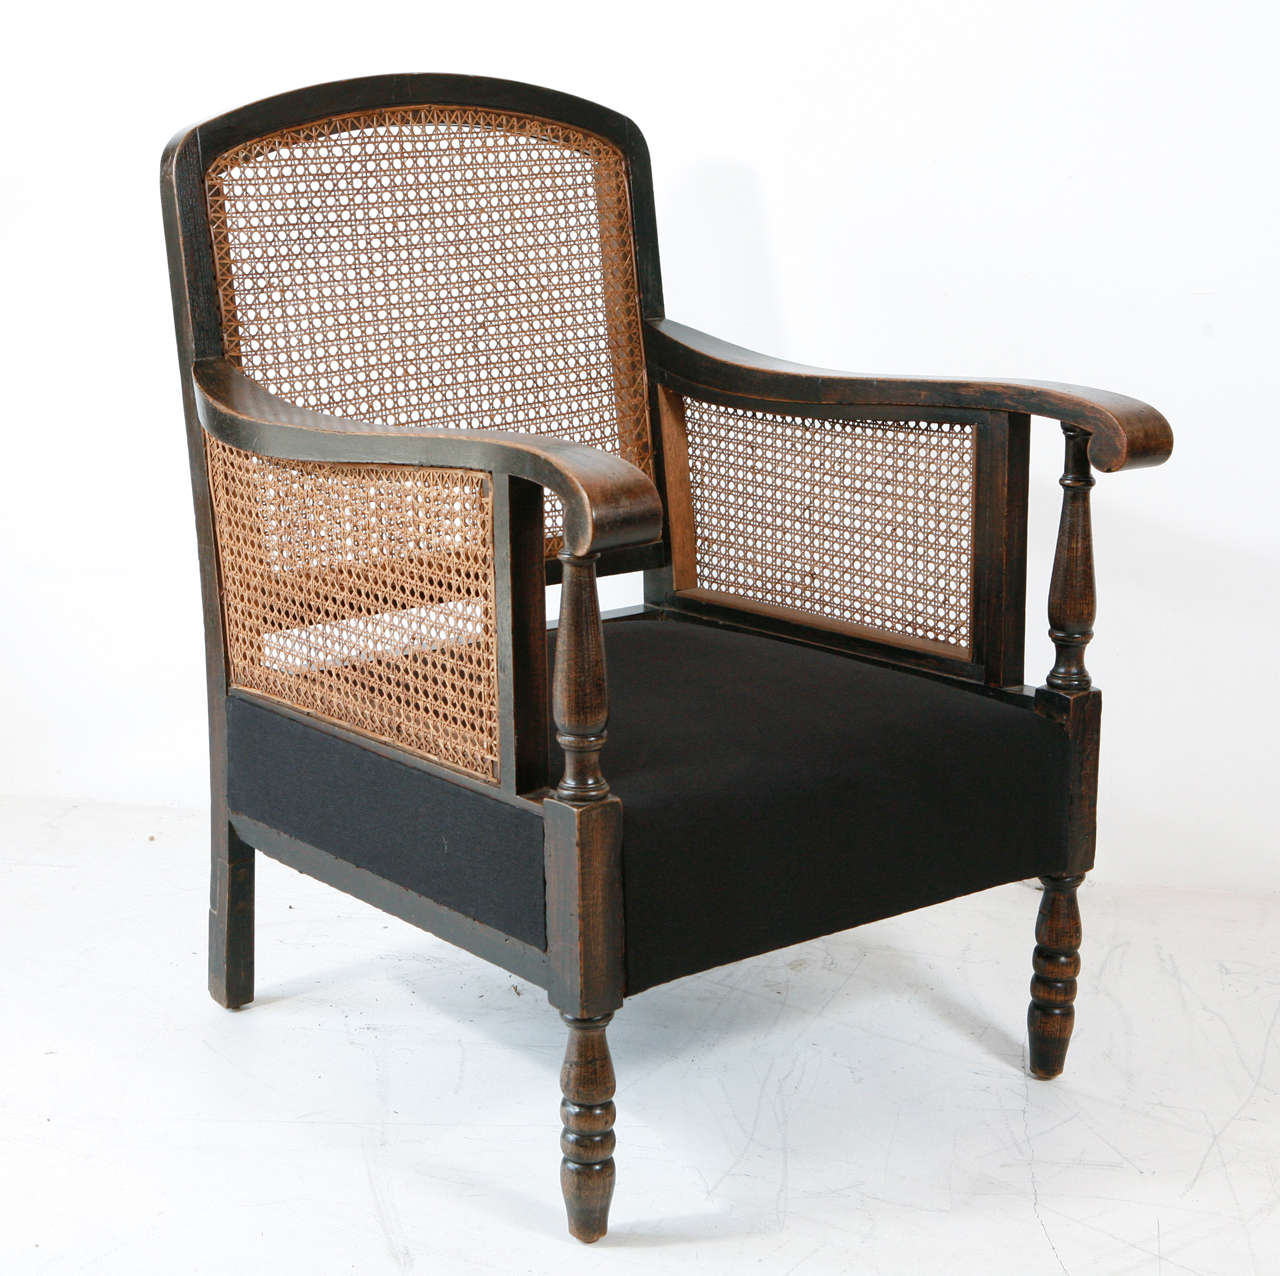 Striking Italian chairs with perfect condition cane back and arms newly reupholstered in black hemp linen. Sold individually.